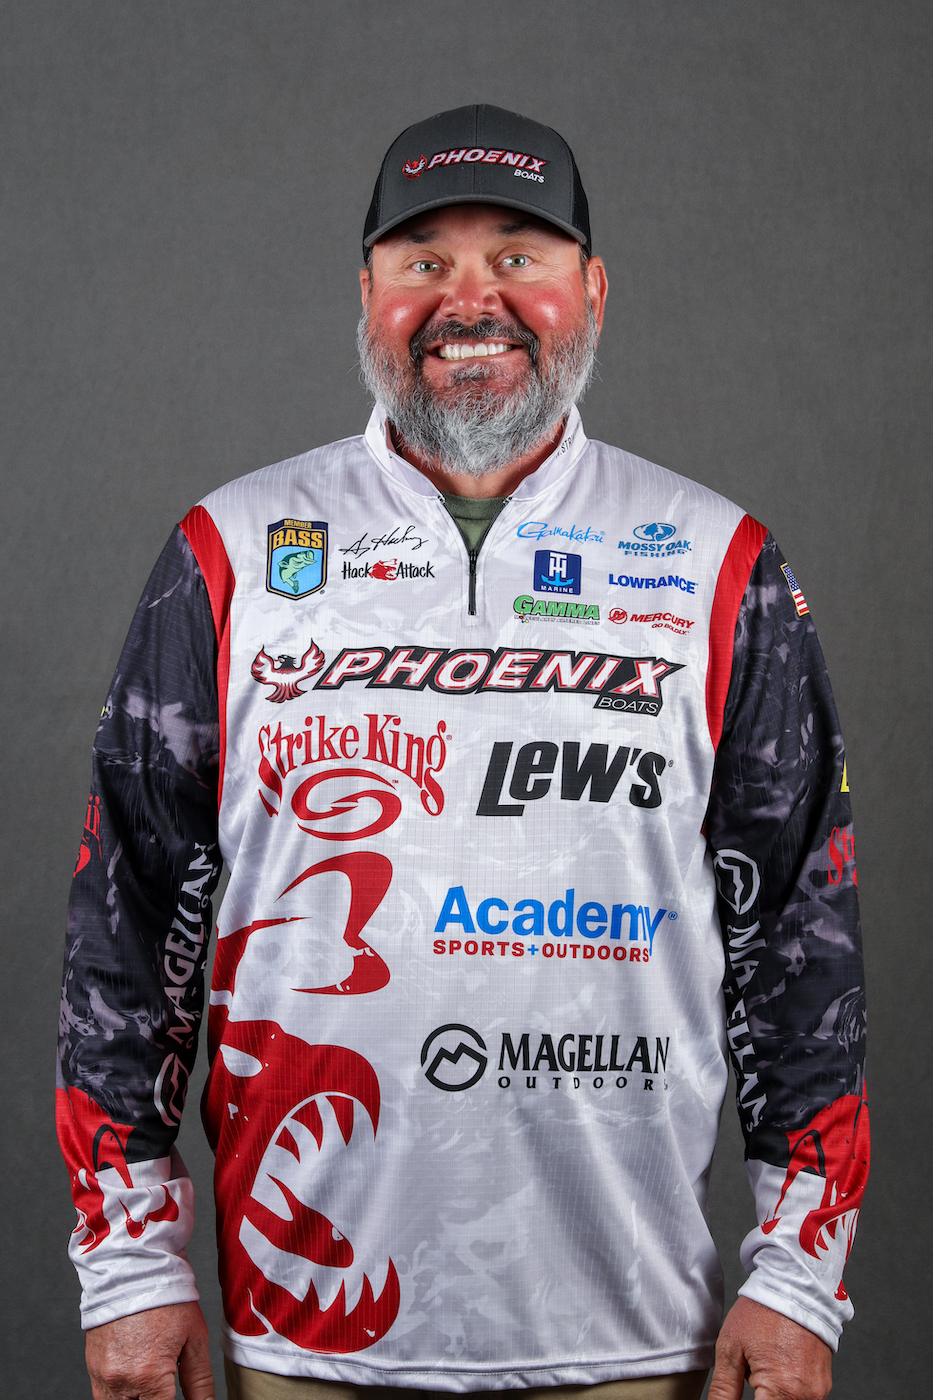 Bass Fishing Team Hat - Hackler Course